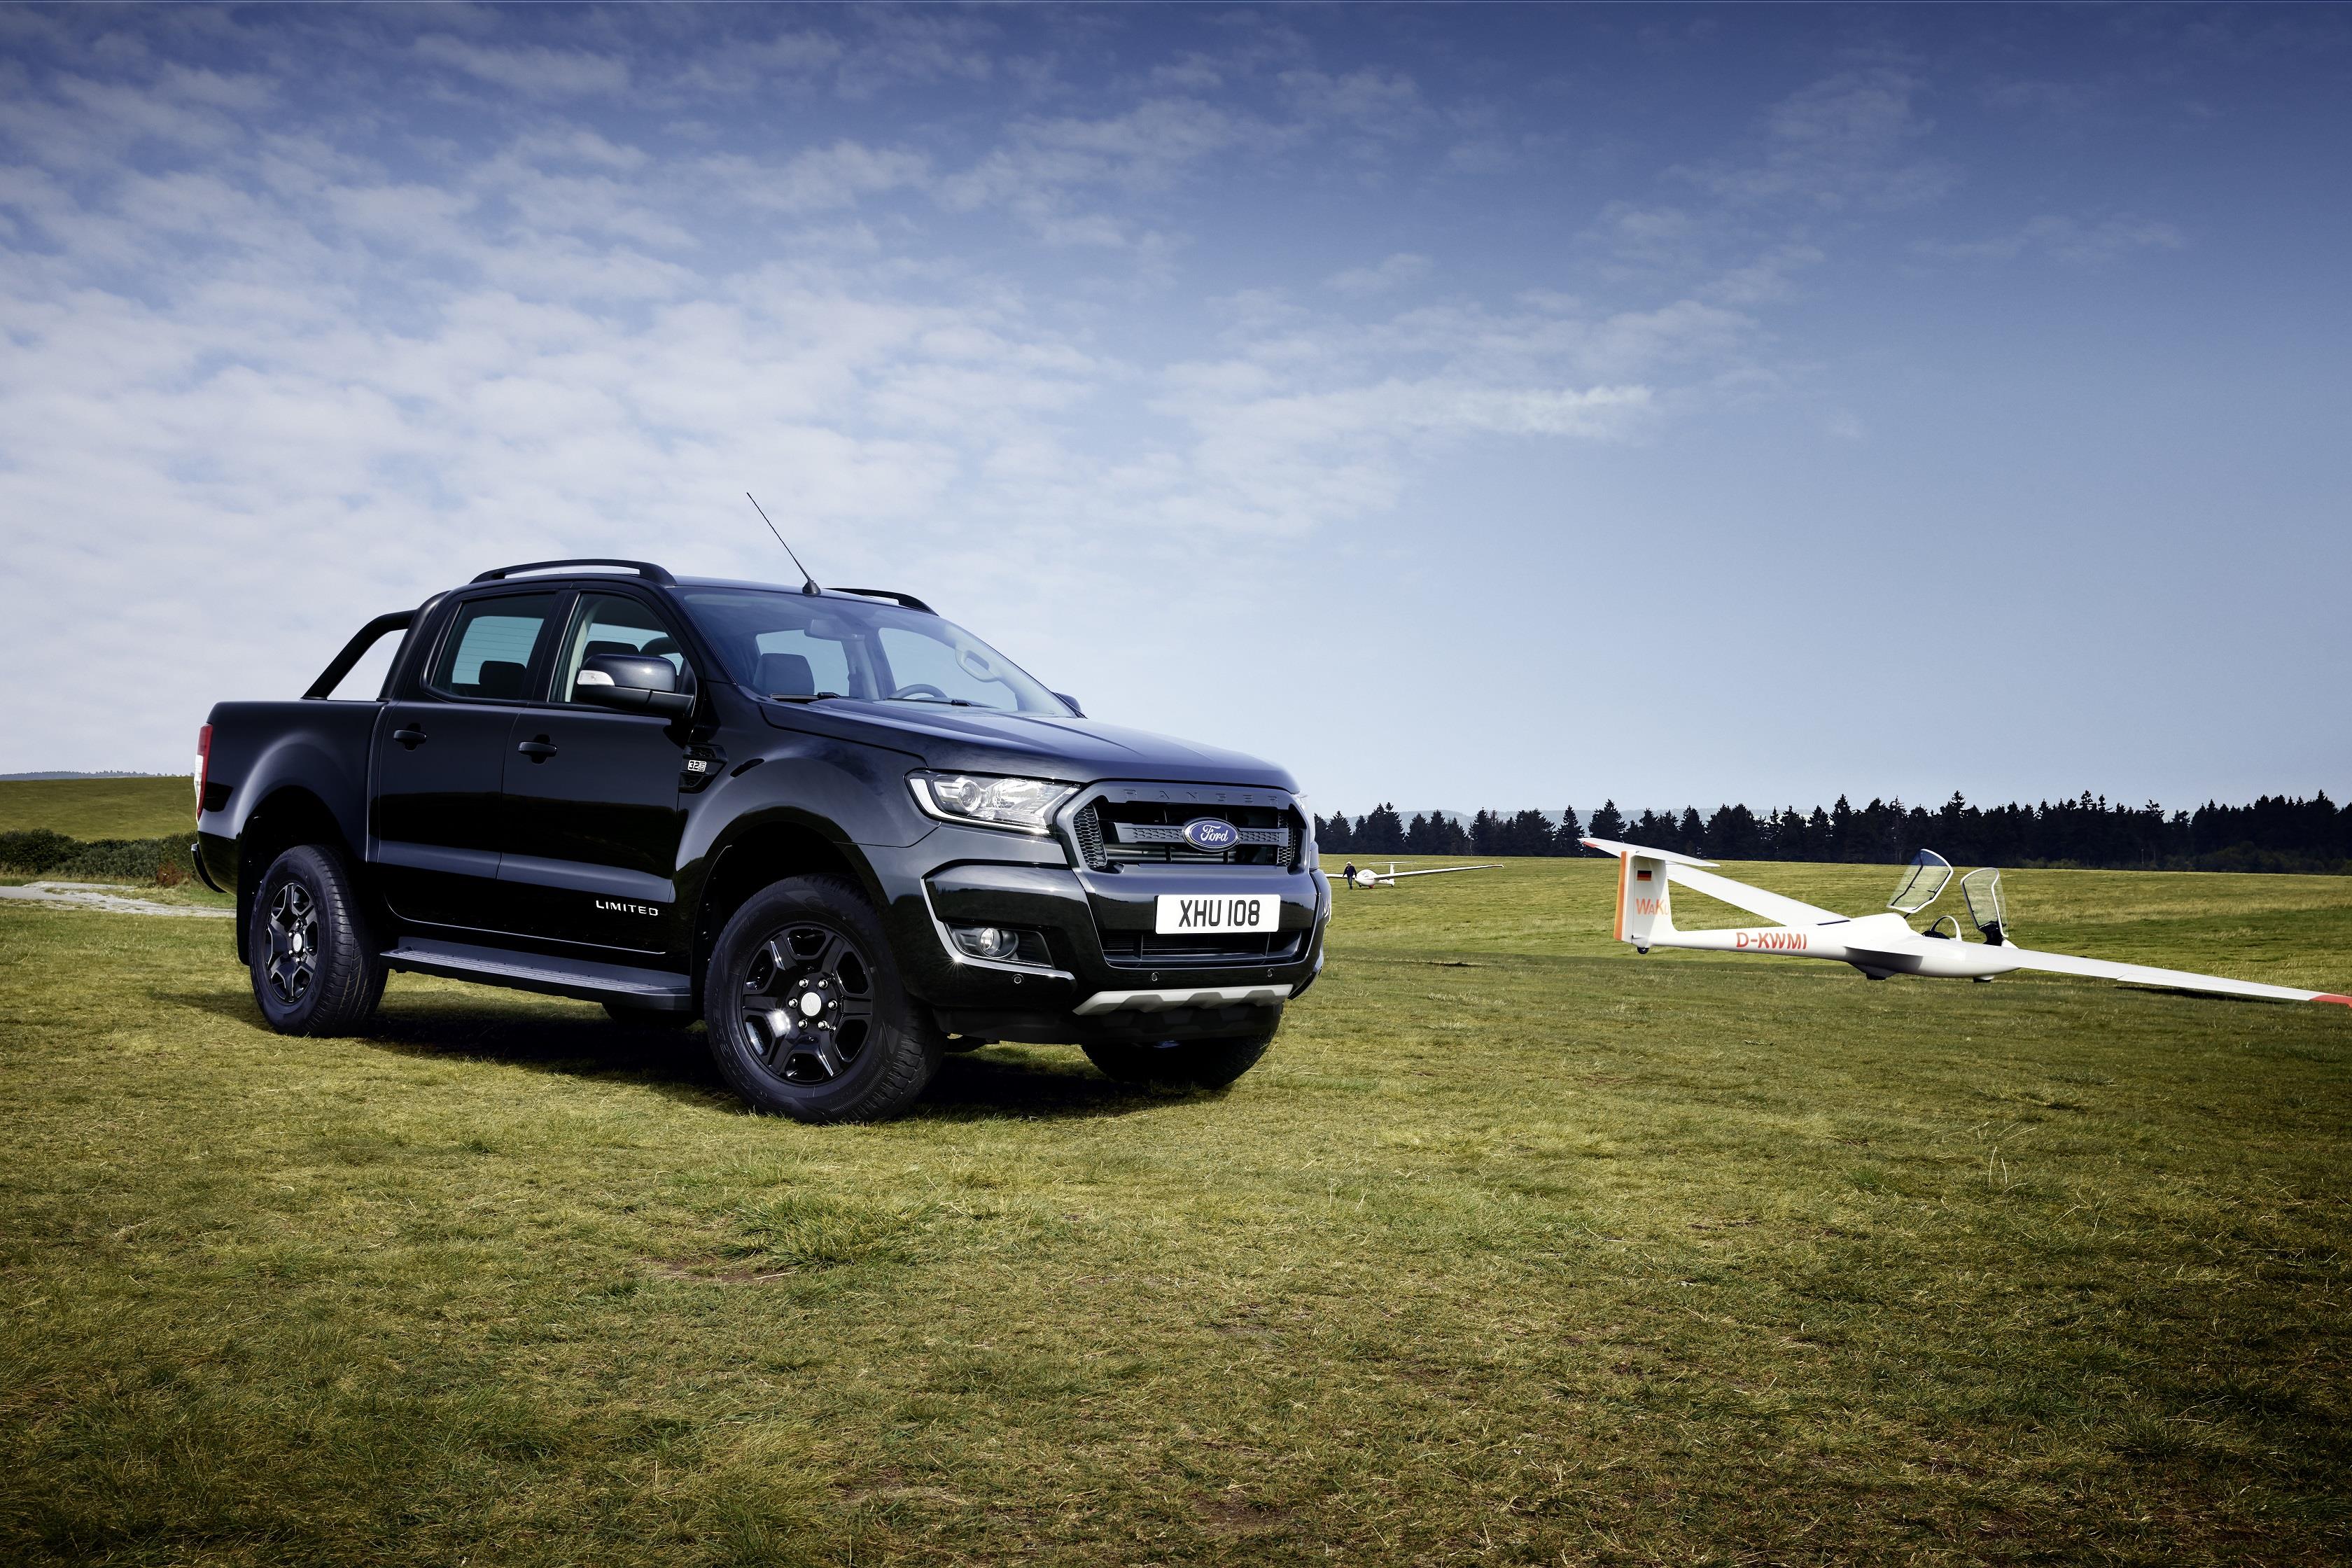 Ford Ranger Black Edition News and Information - .com